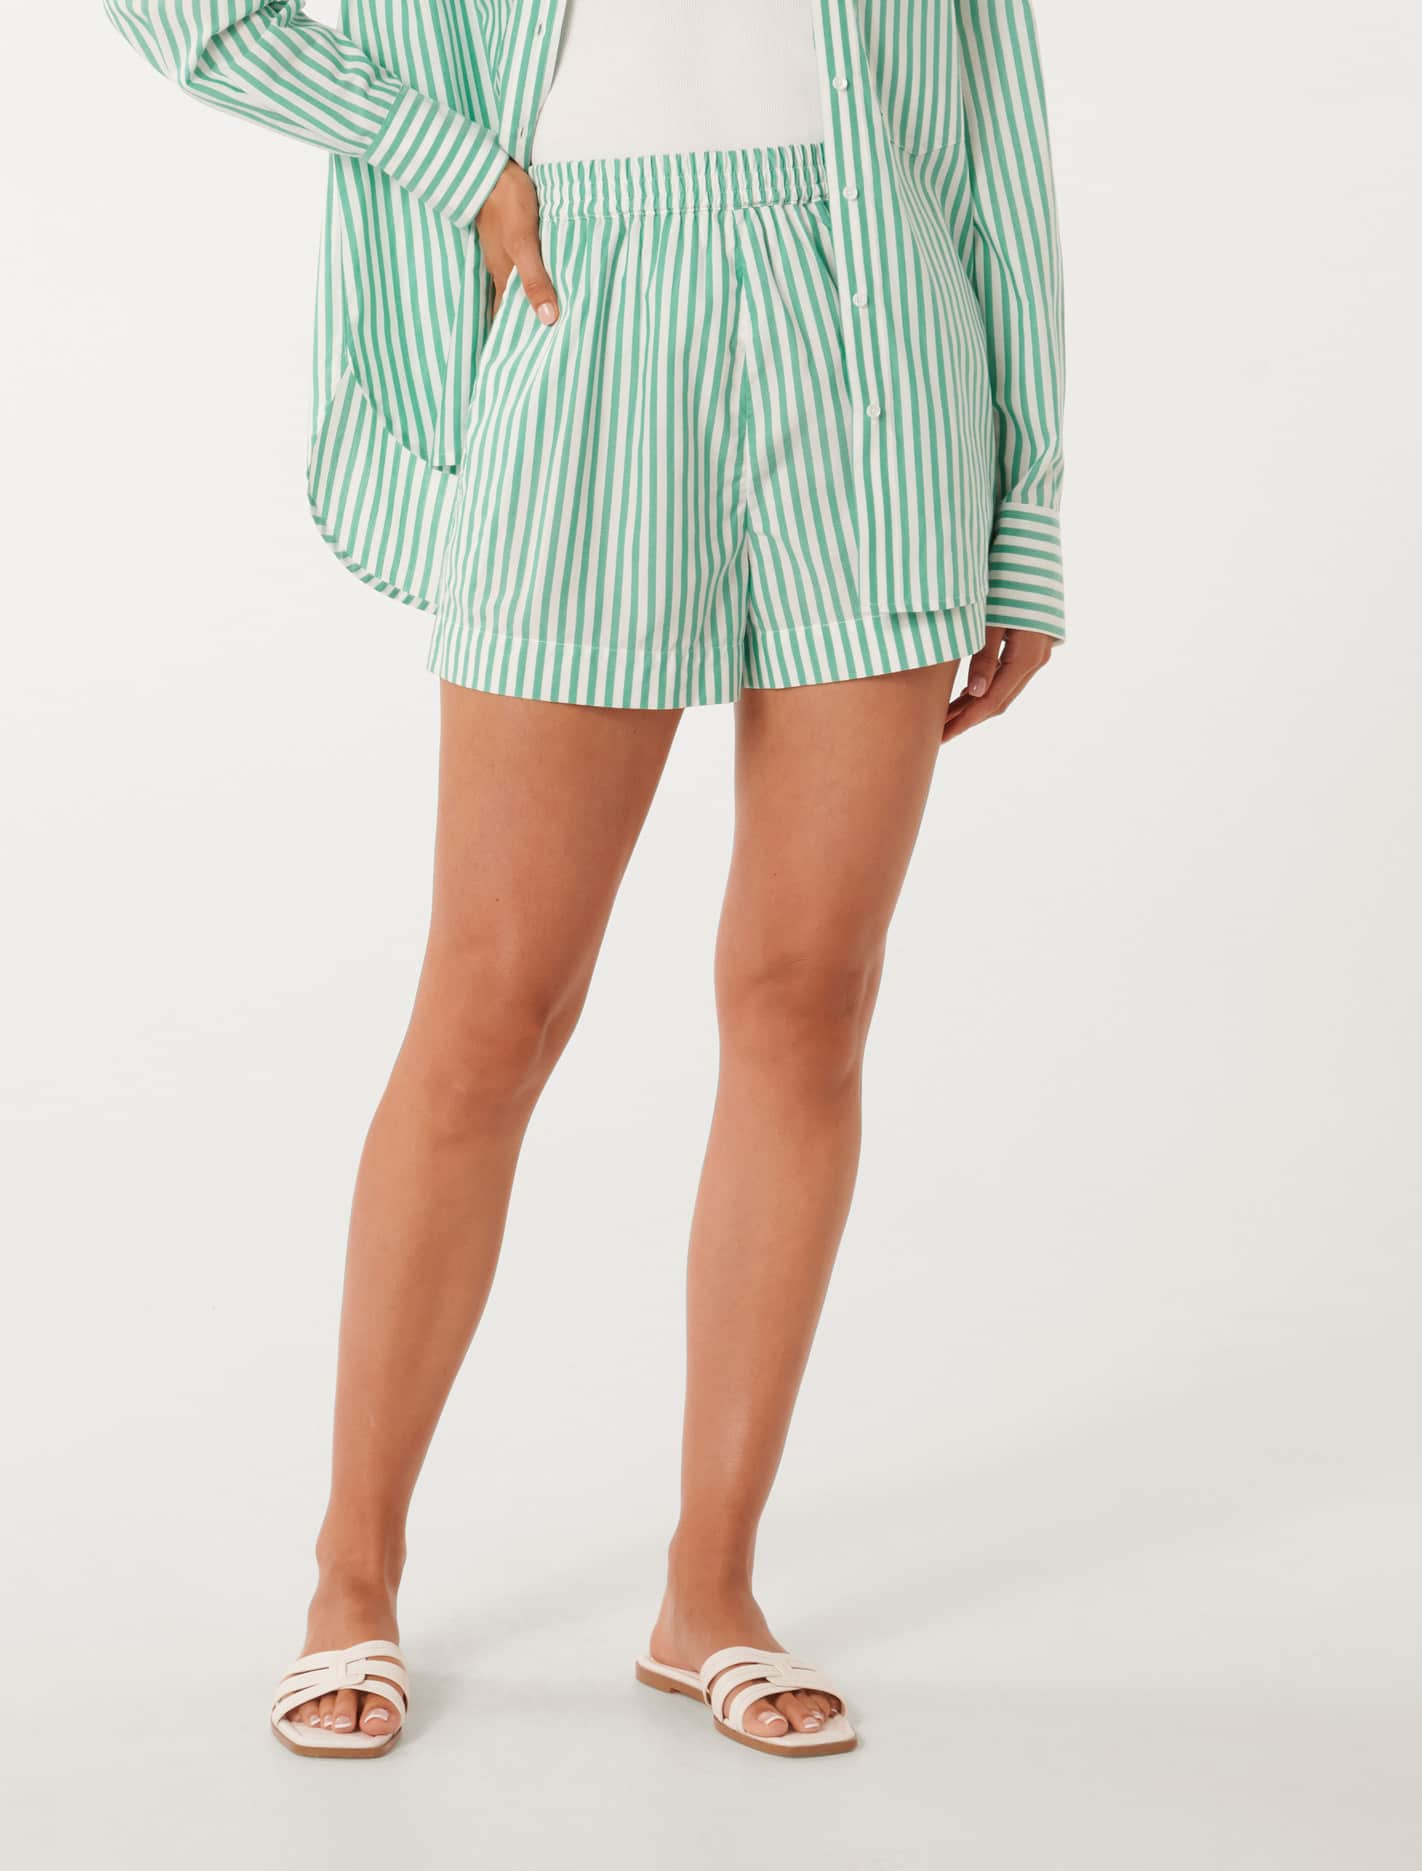 Stripe Linen Ladies Shorts made in South Africa